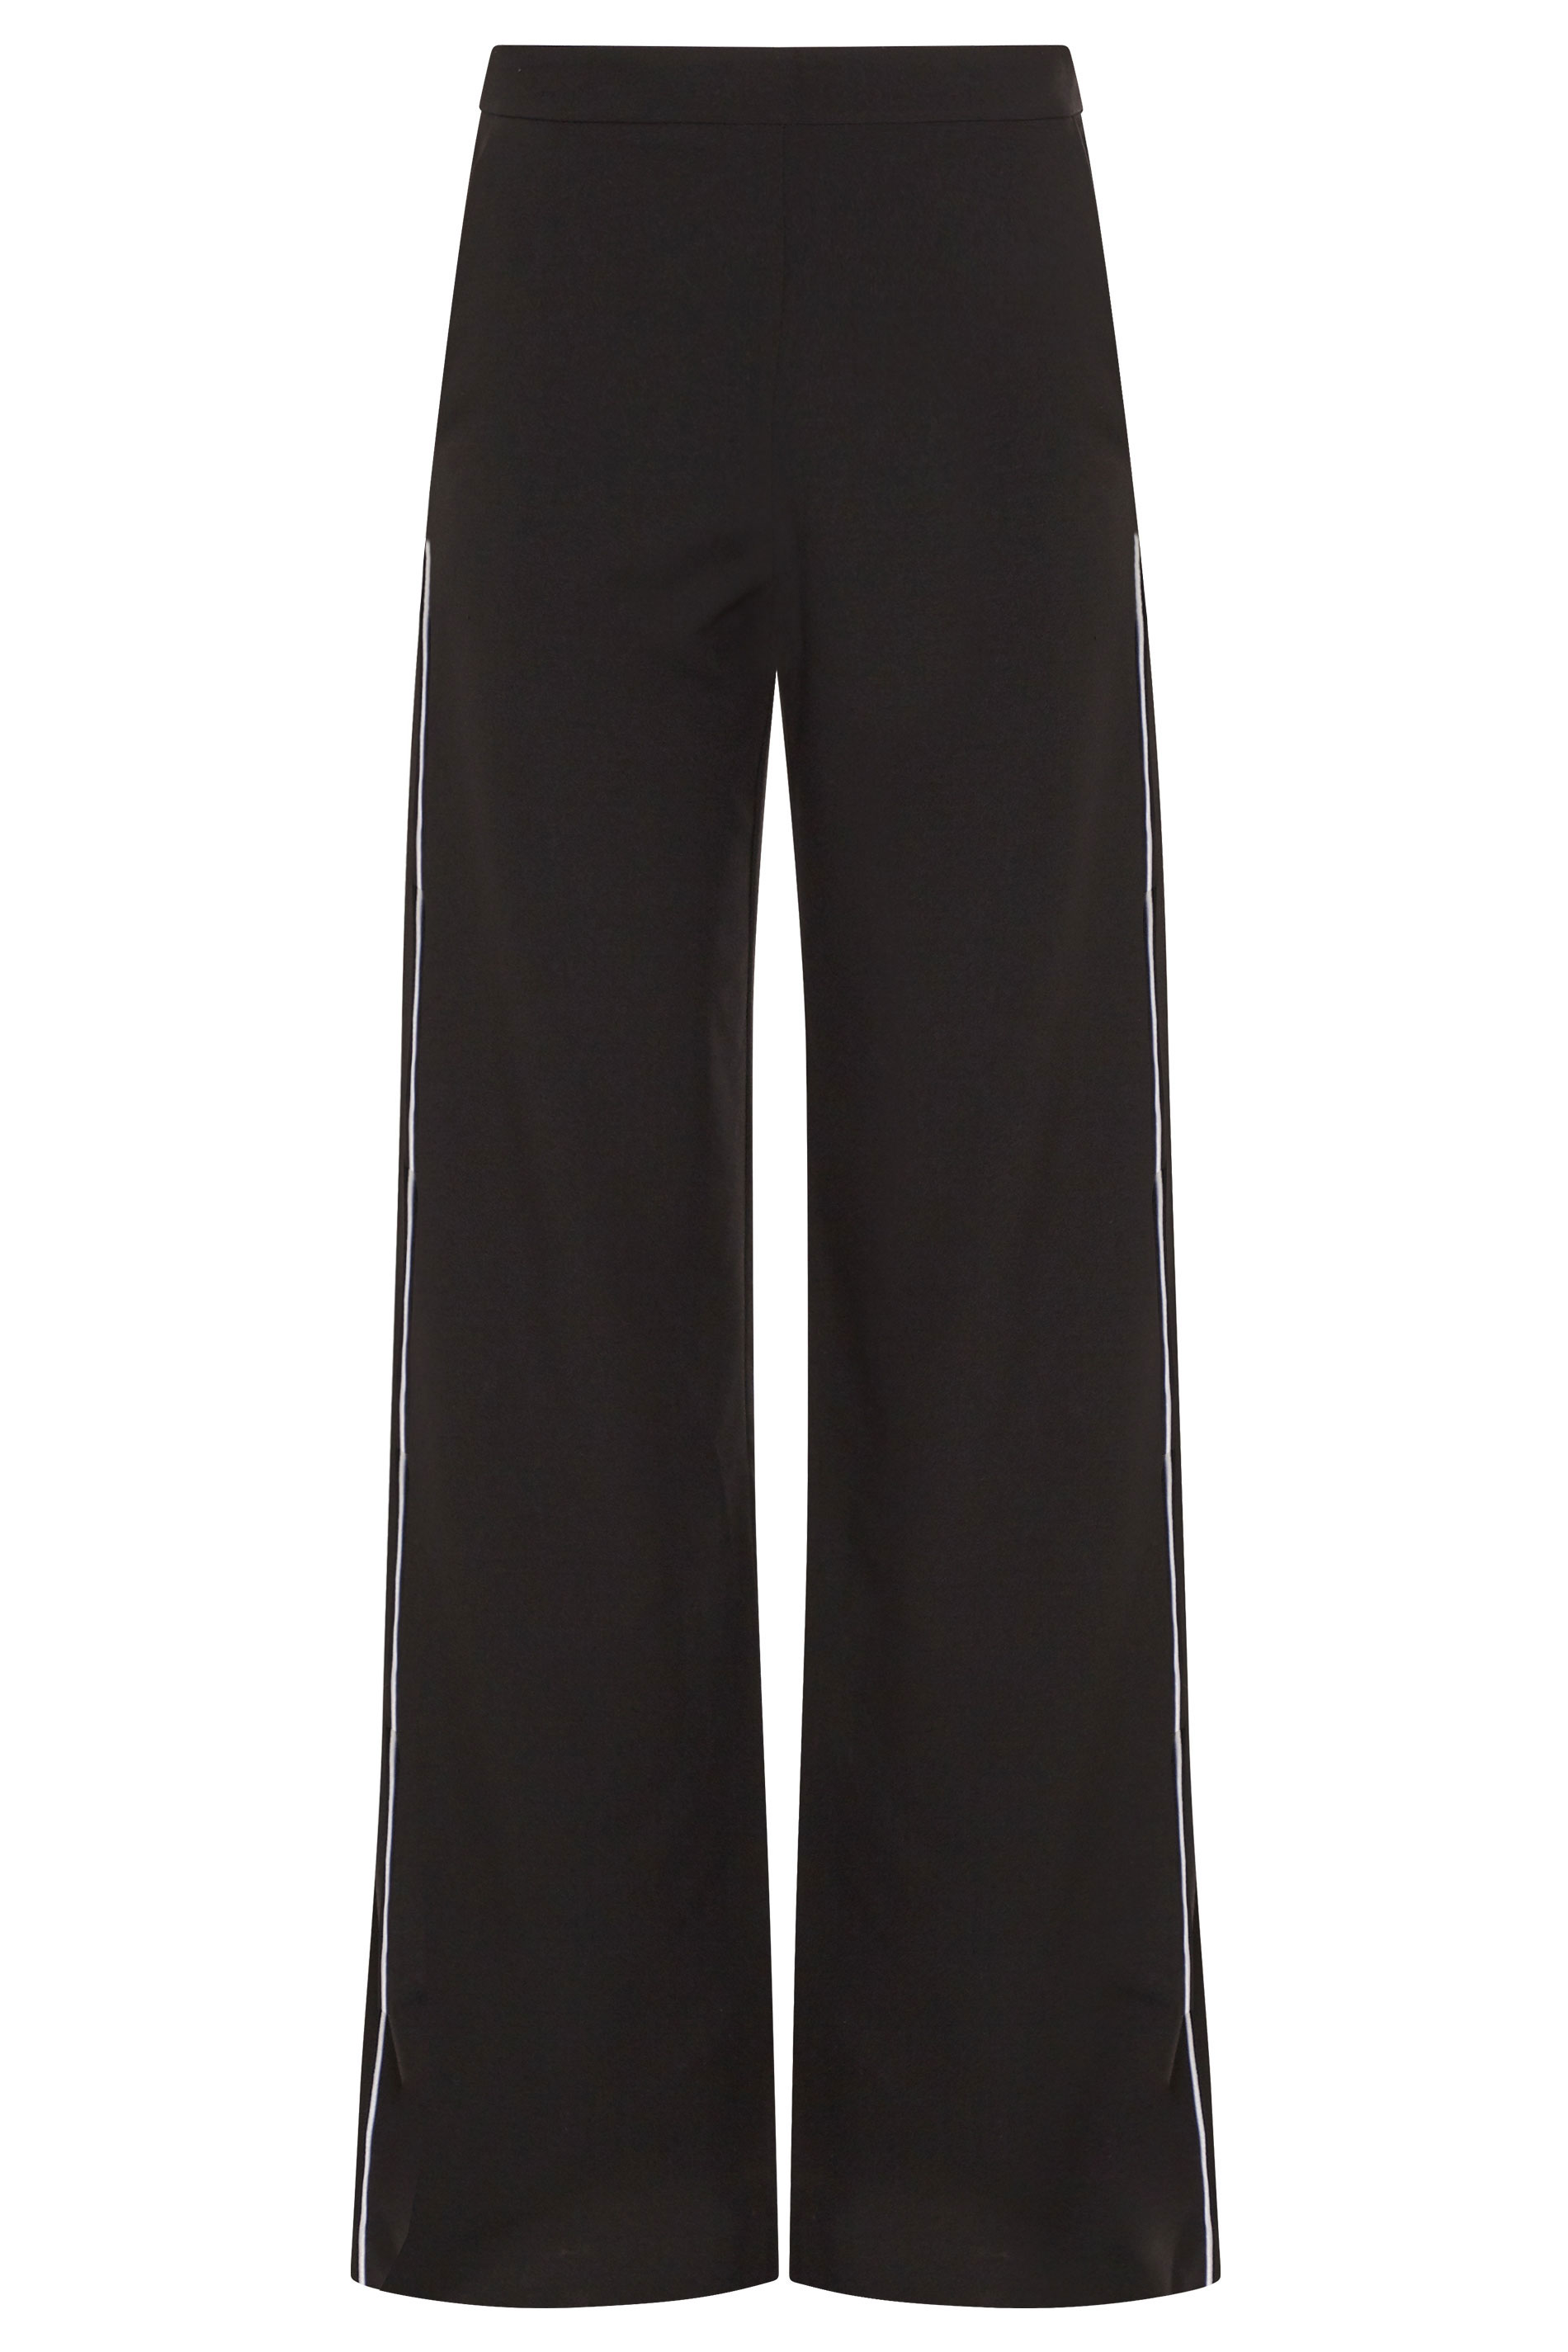 Black Crepe Wide Leg Tipped Trouser | Long Tall Sally